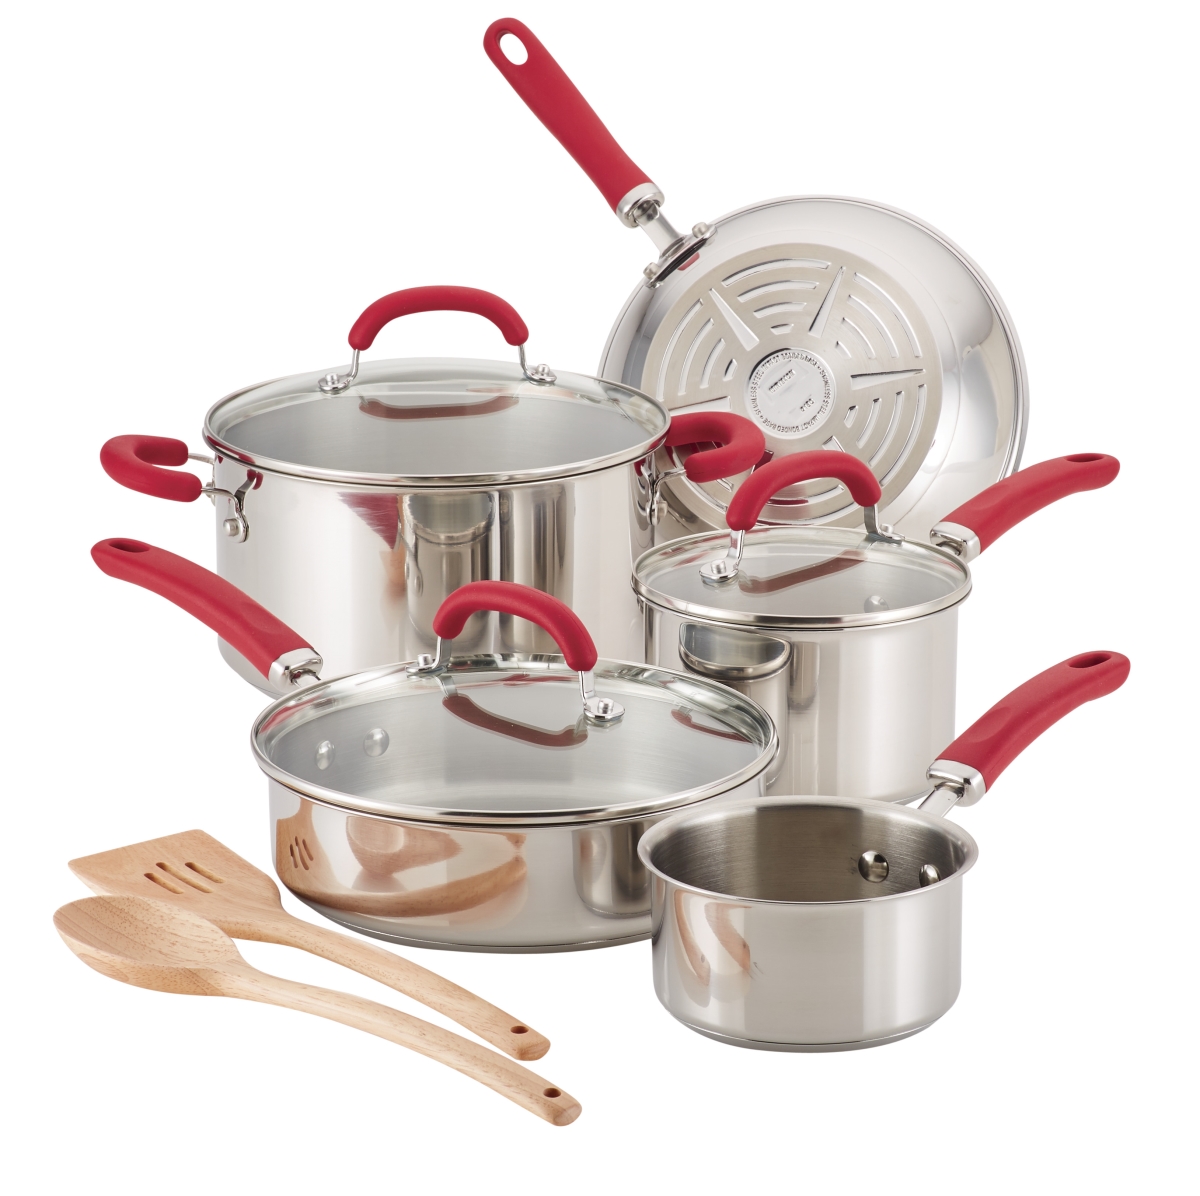 Picture of Rachael Ray 70413 Create Delicious Stainless Steel Cookware Set, 10 Piece - Red Handles